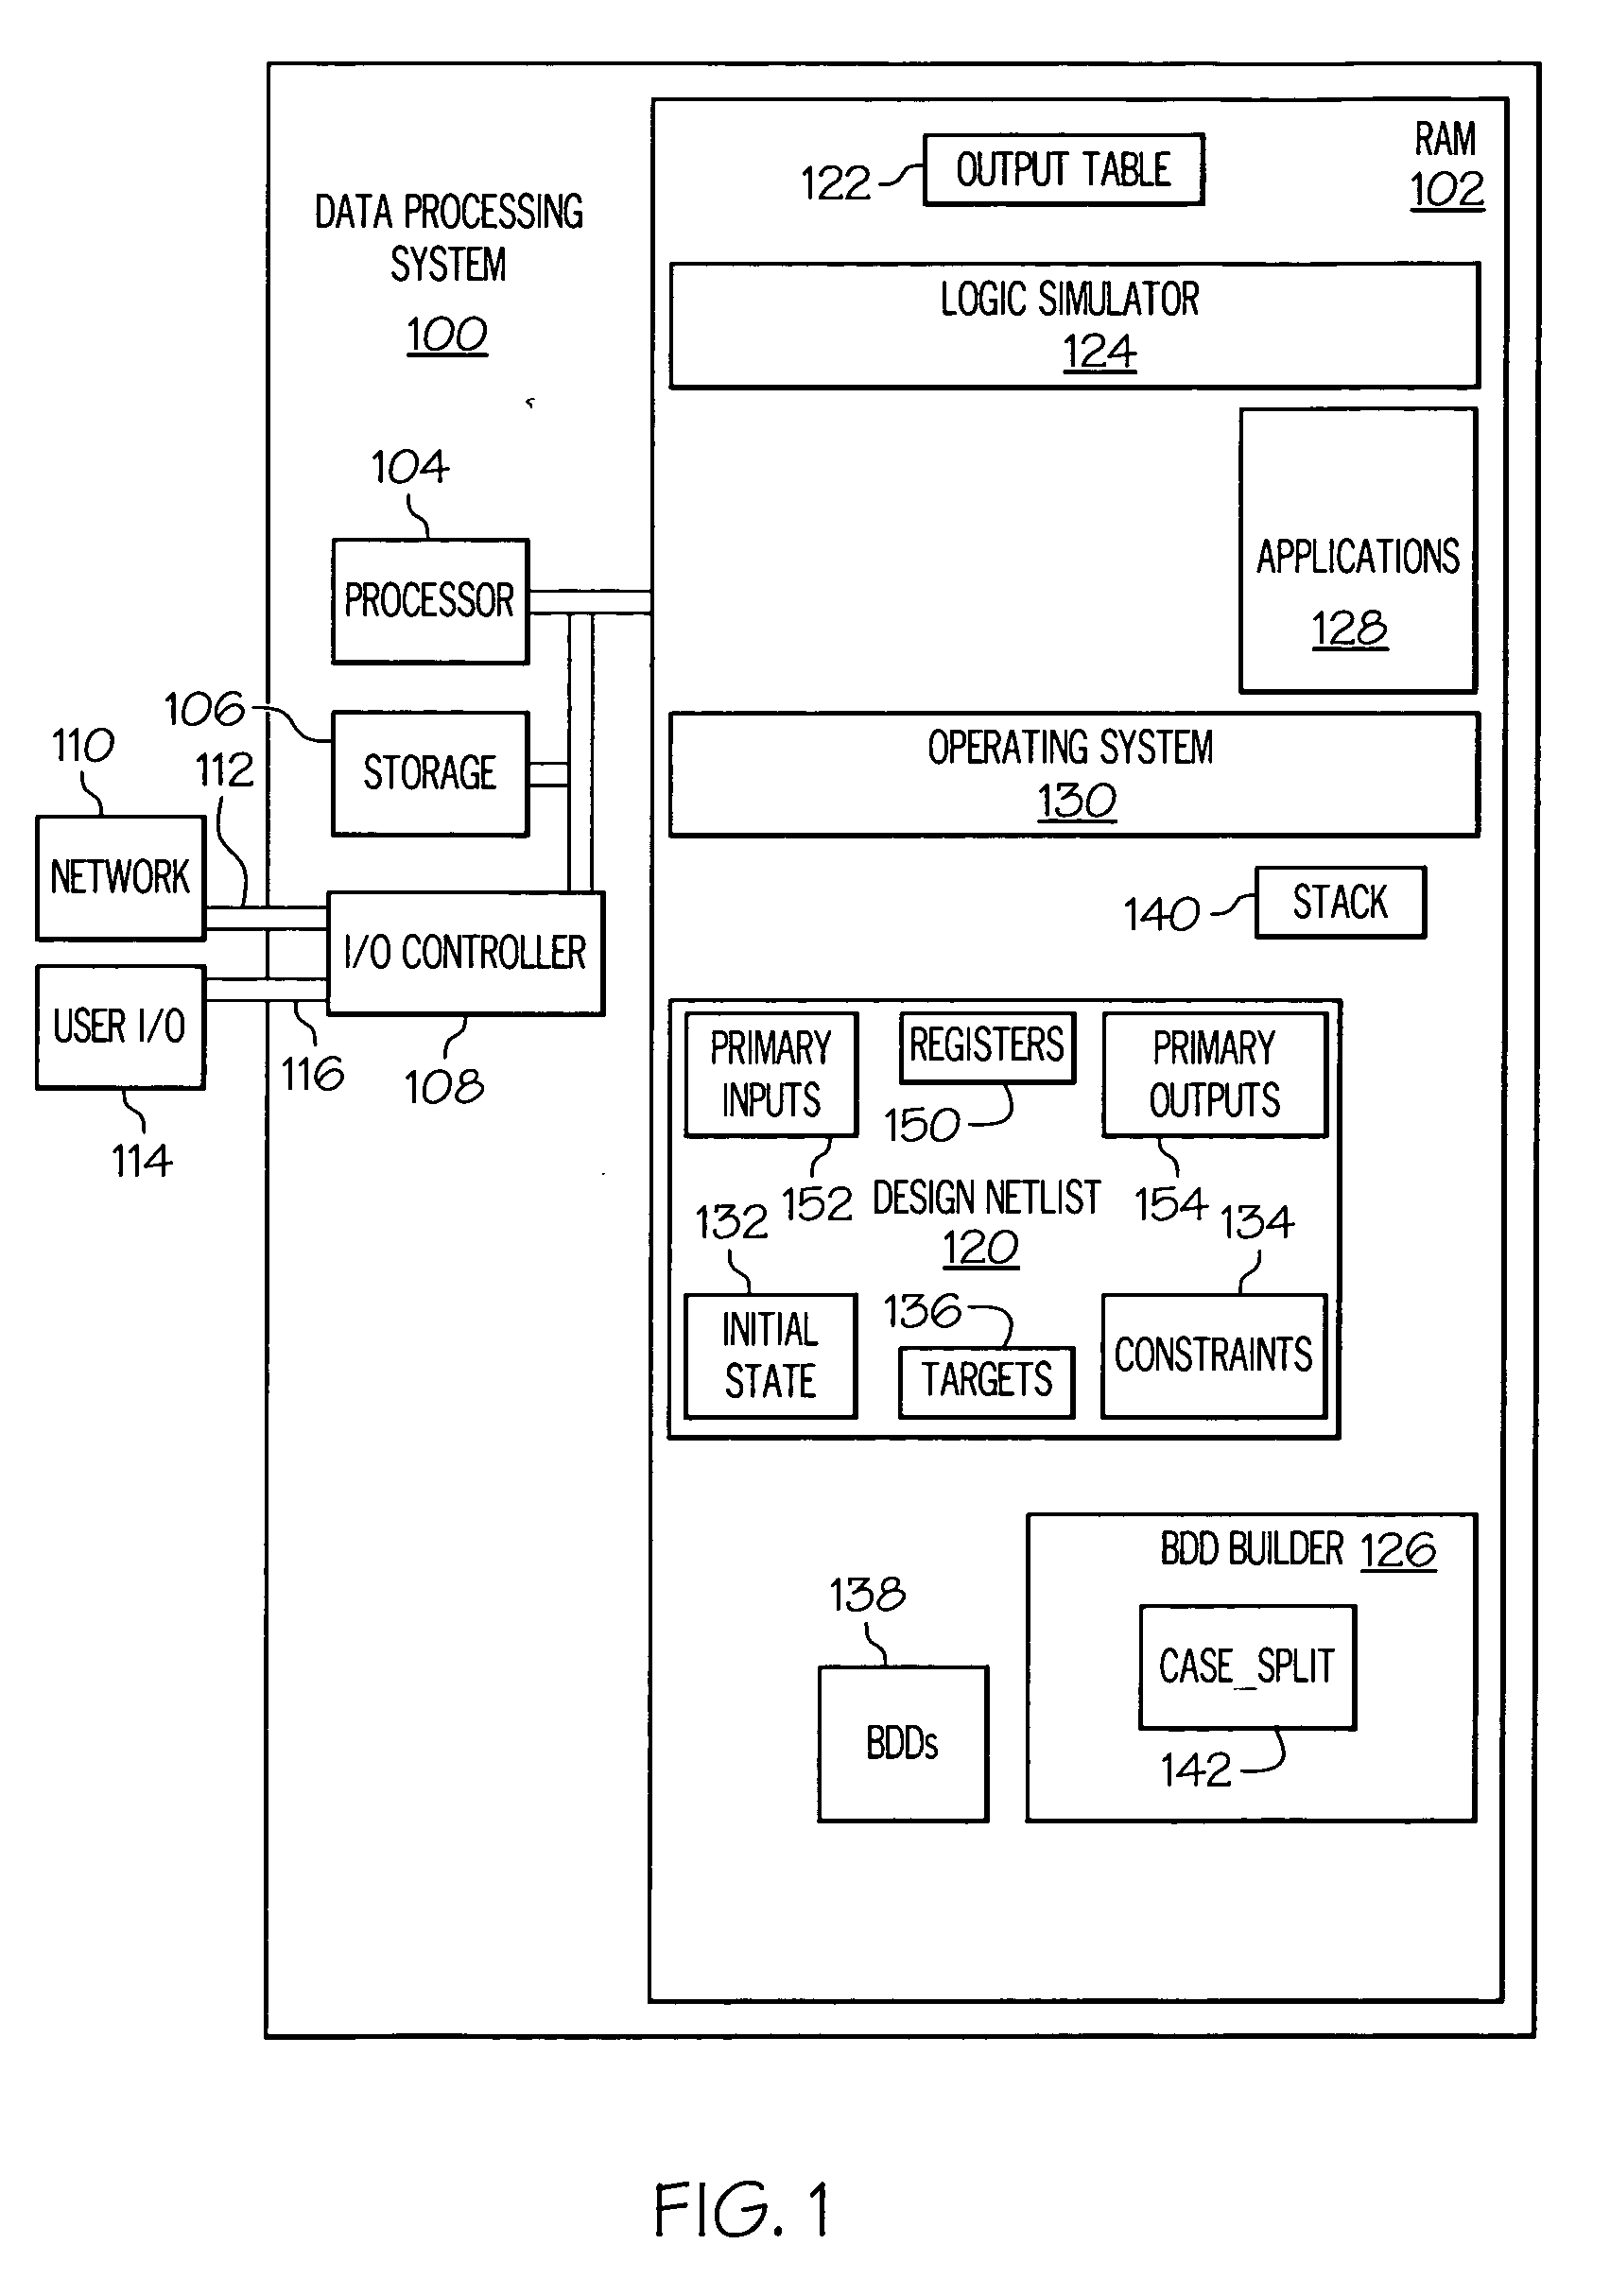 Method and system for case-splitting on nodes in a symbolic simulation framework